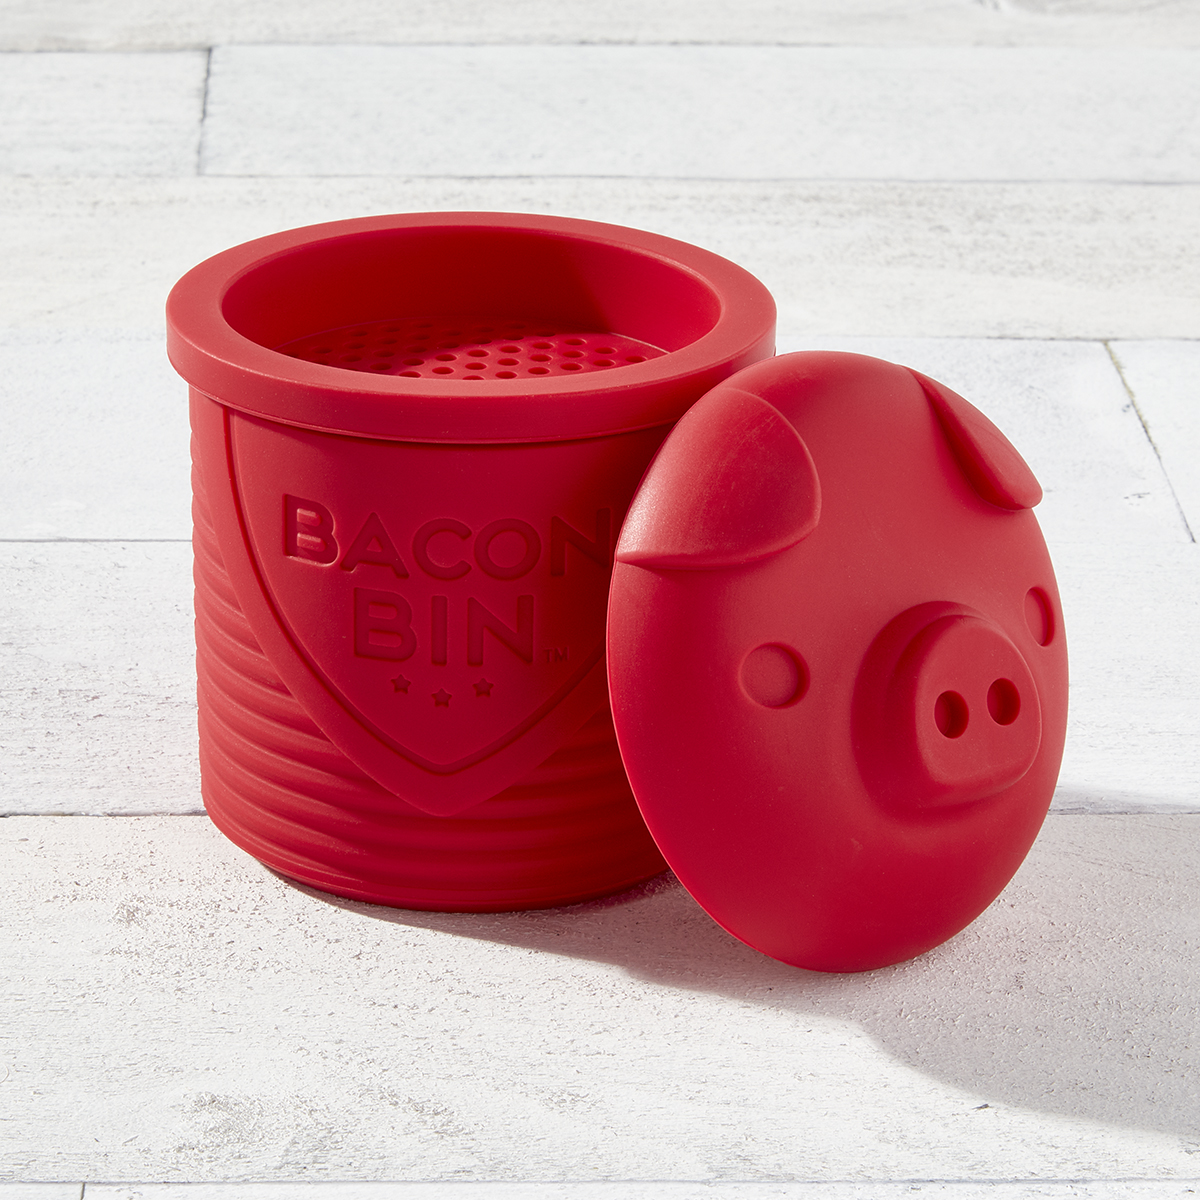 https://www.containerstore.com/catalogimages/374558/SS_19_Bacon-Bin_RGB.jpg